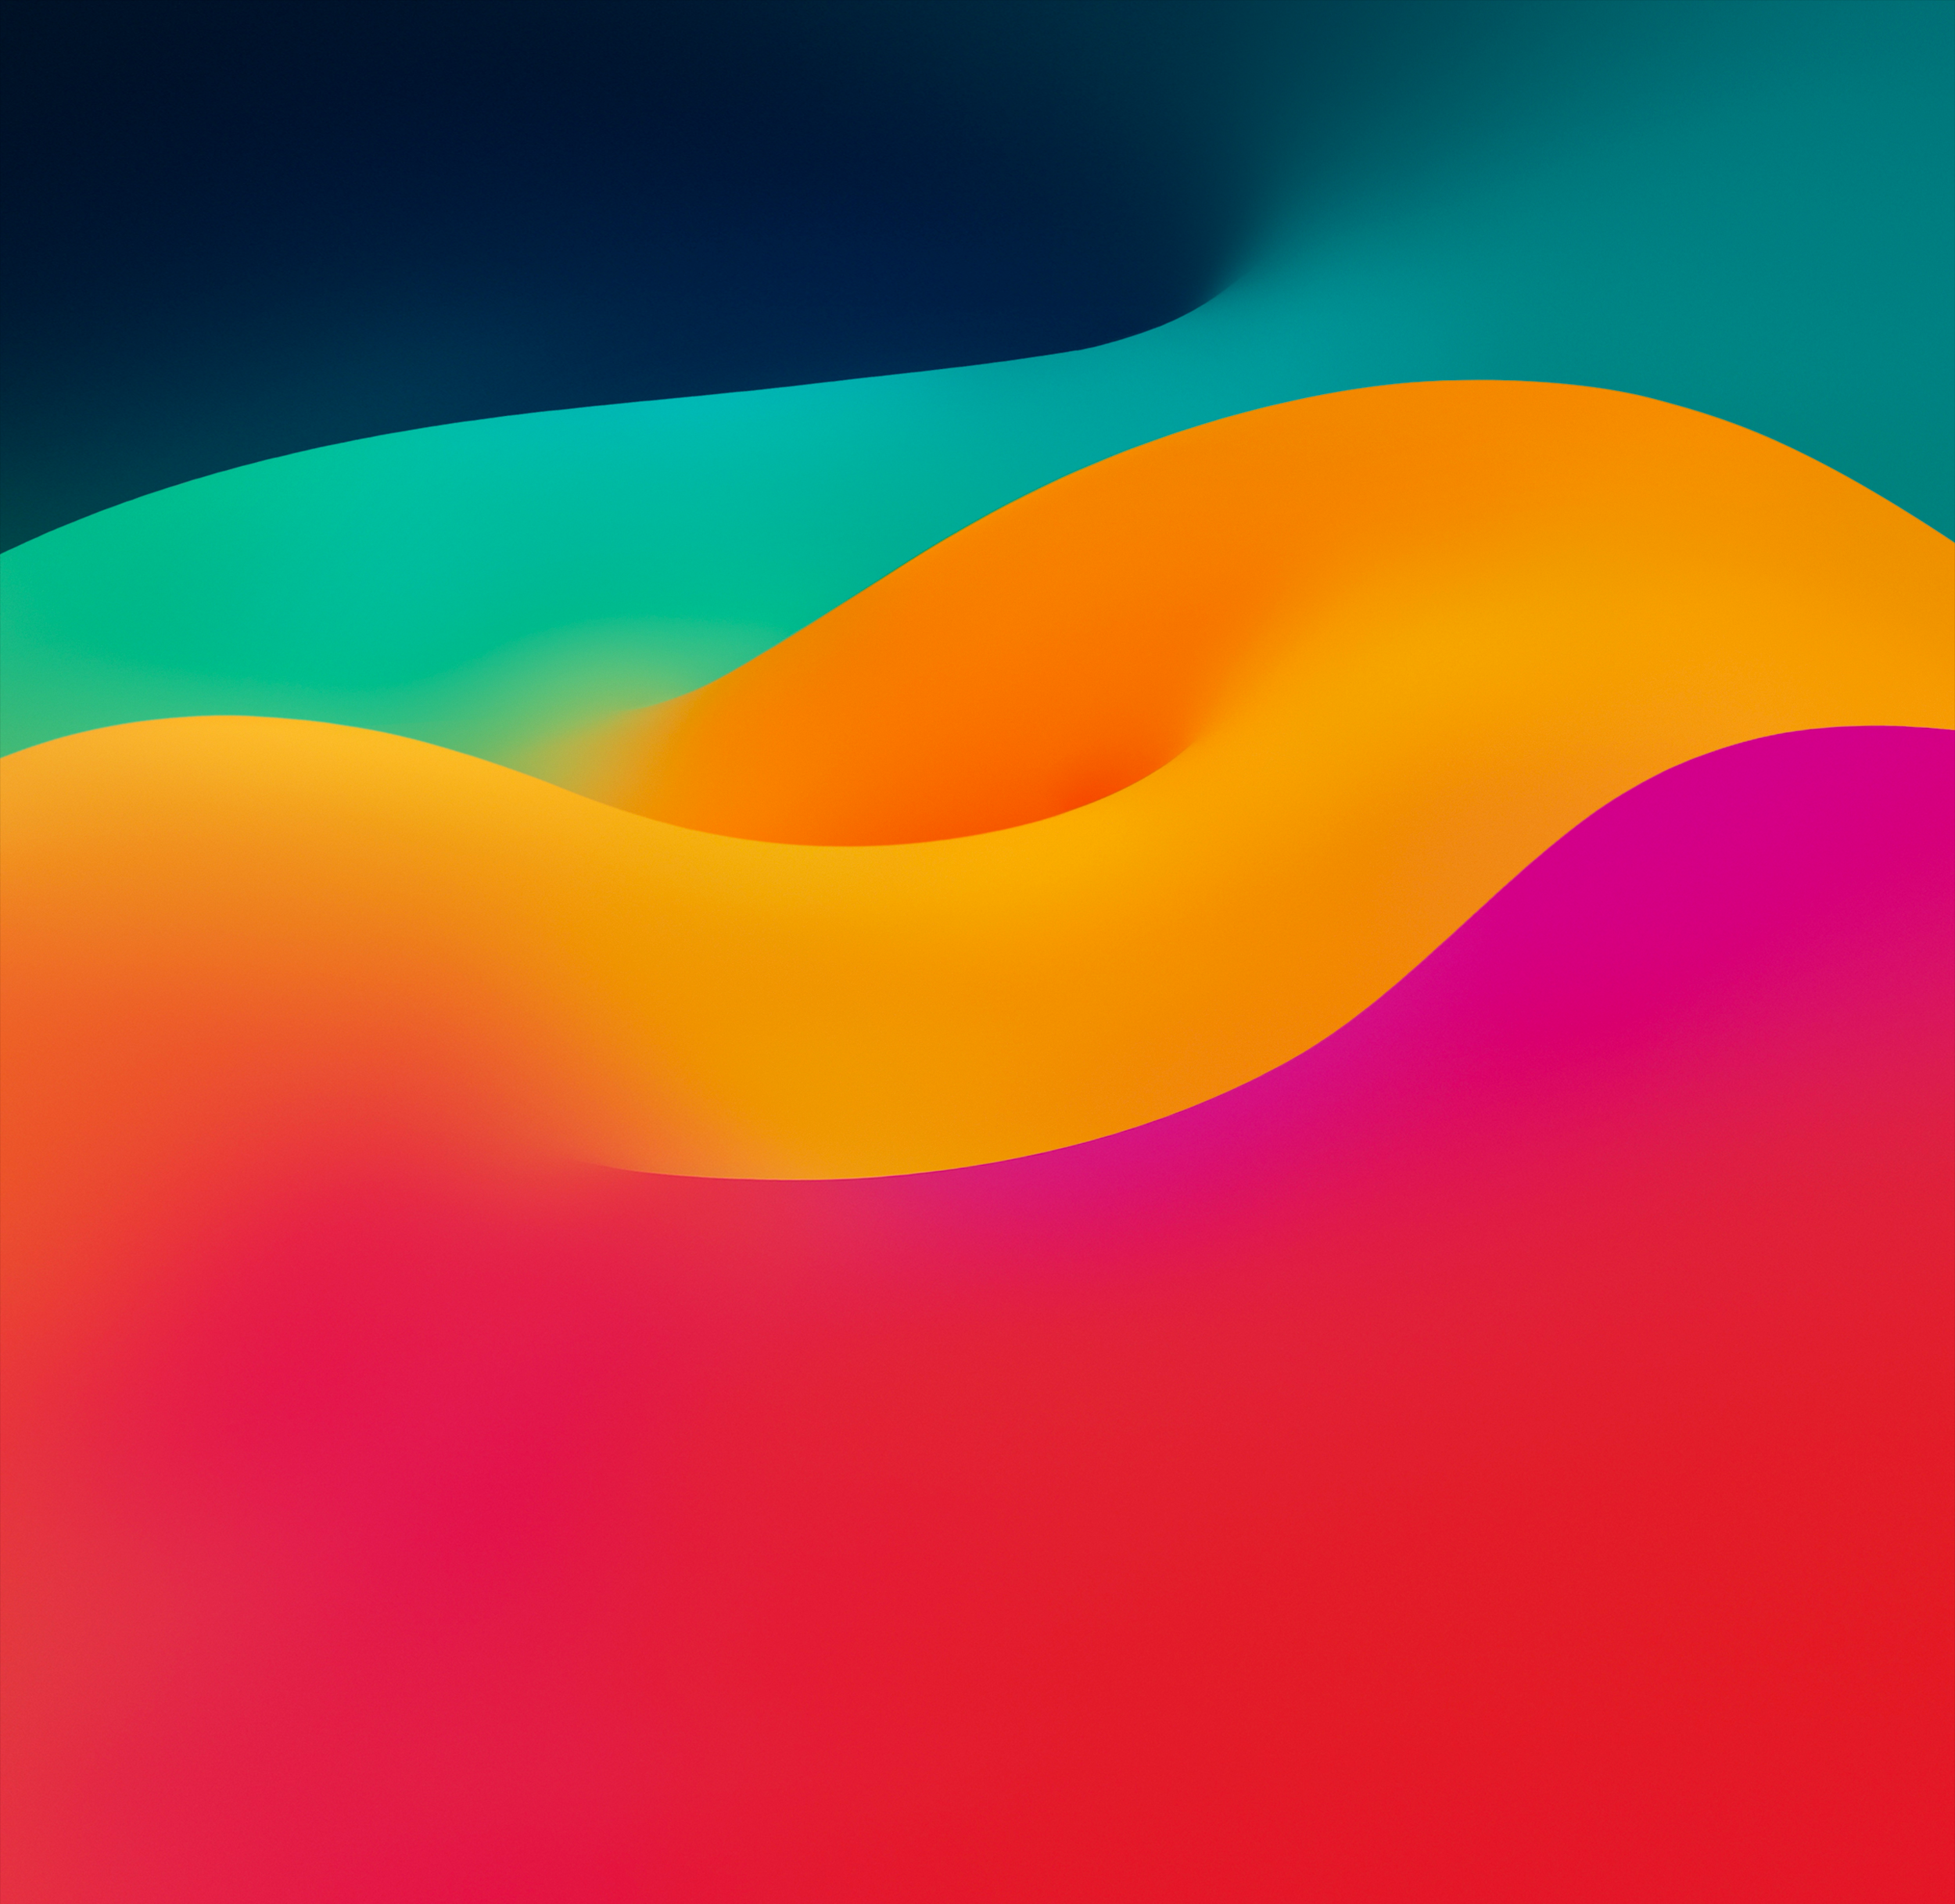 iPadOS 17 Stock Wallpaper in High Quality by ispazio Dark